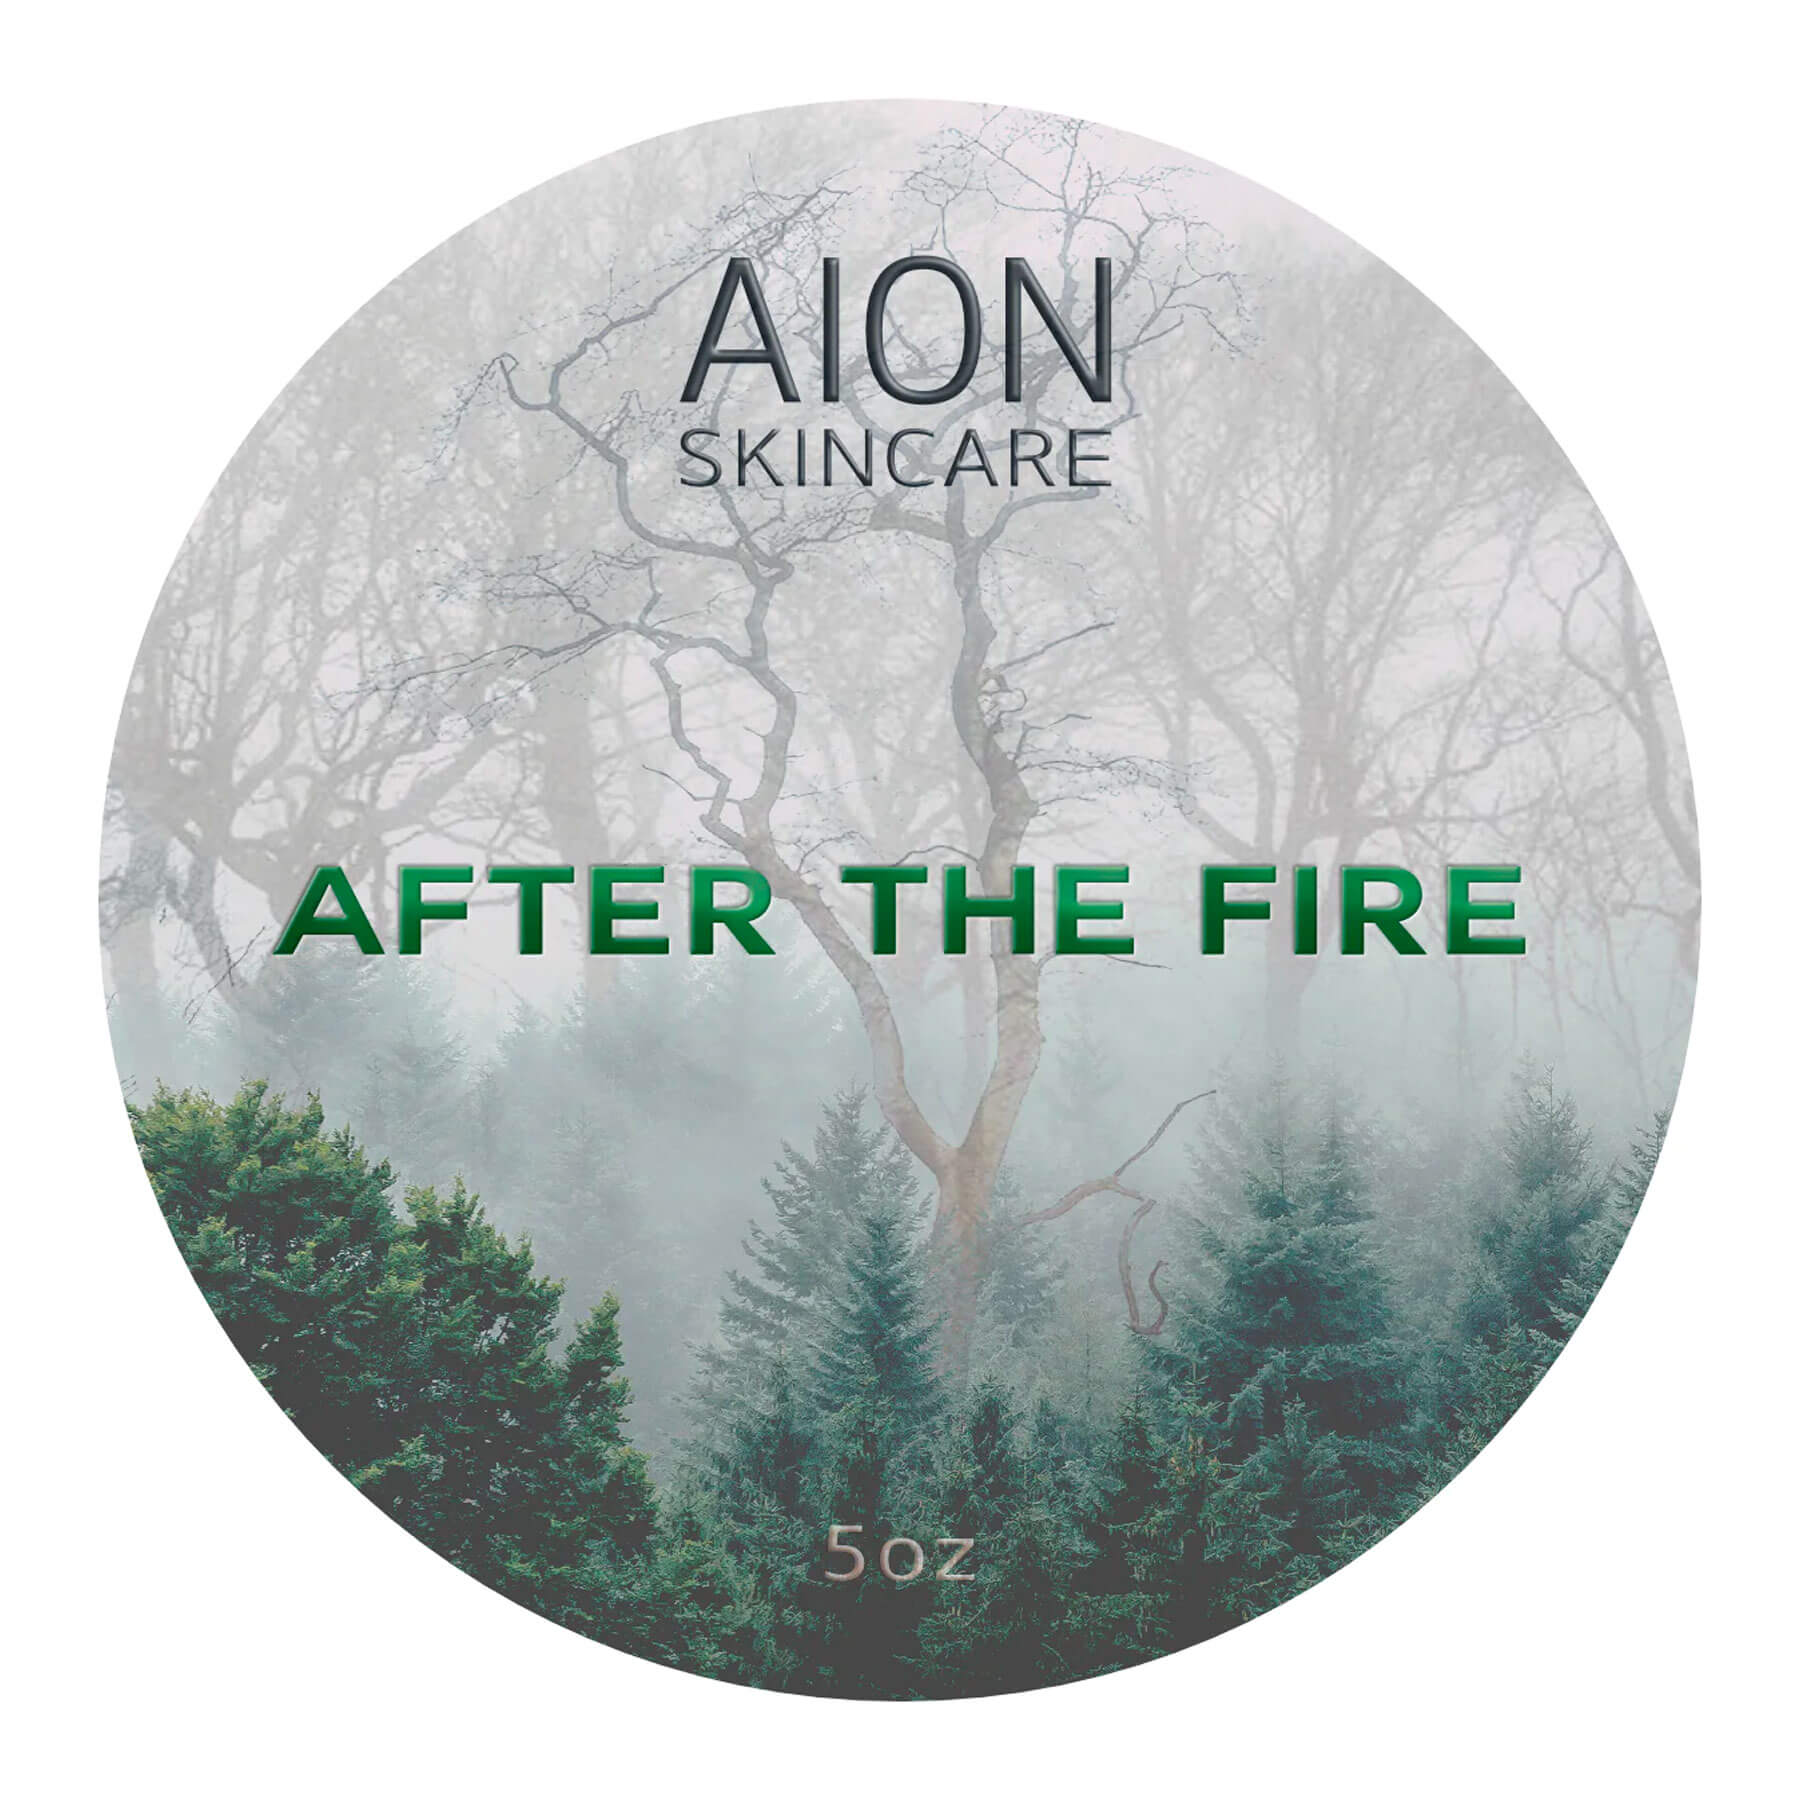 Aion Skincare After The Fire Shaving Soap